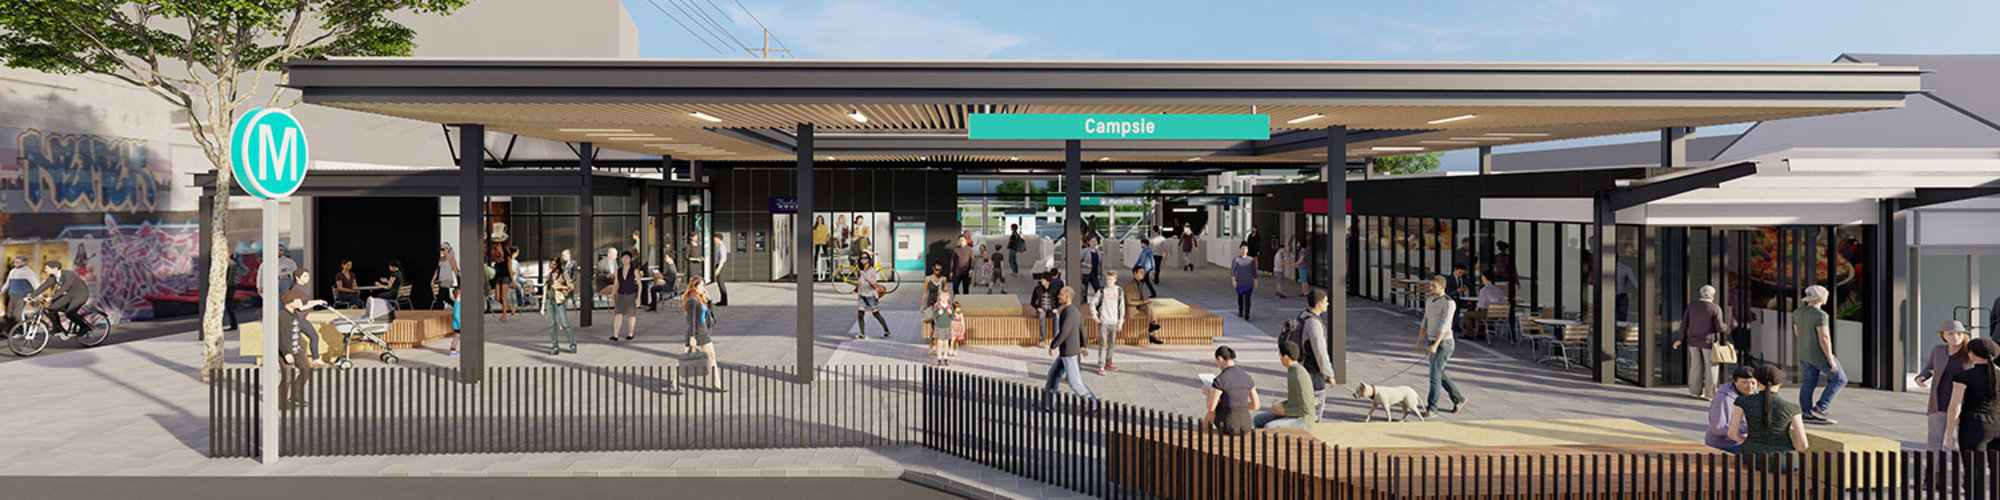 An artist’s impression of the entrance to the future metro station at Campsie (as viewed from Beamish Street), being delivered as part of the Sydney Metro City & Southwest project.